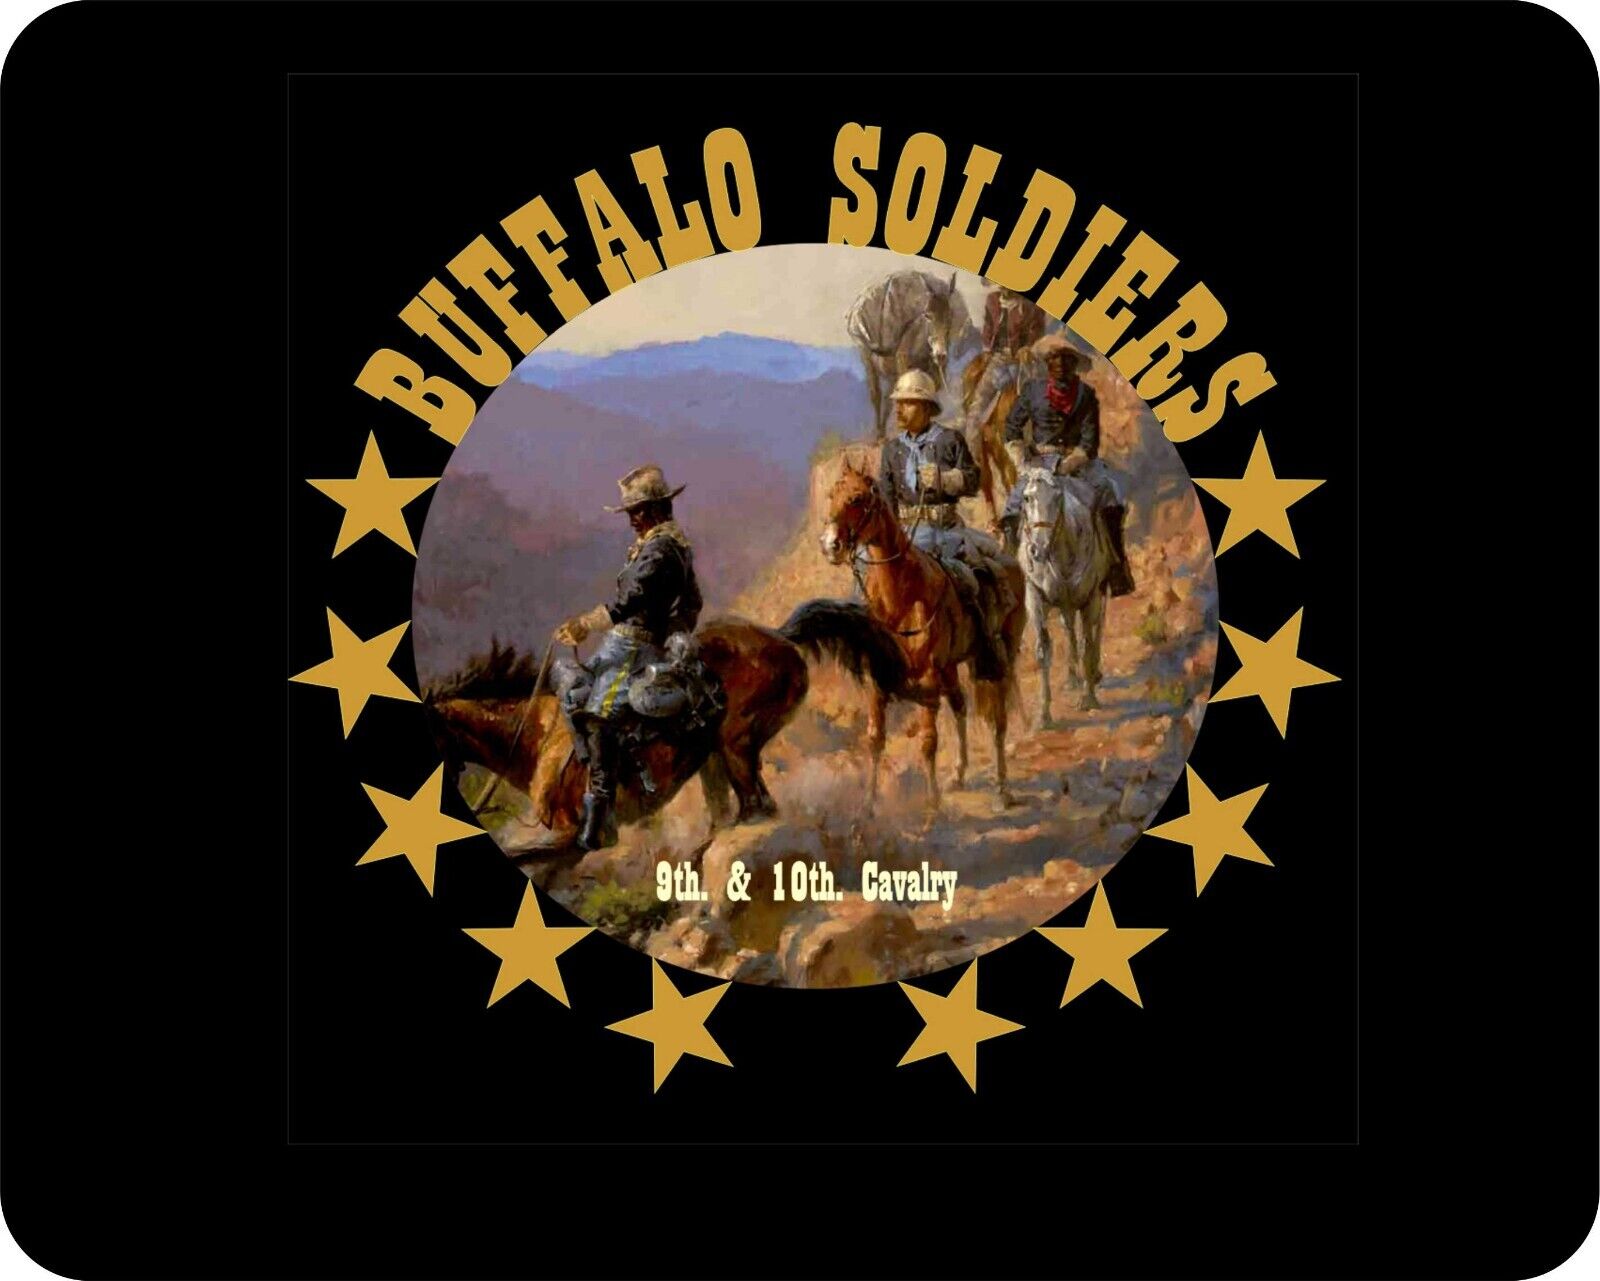 Buffalo Soldiers CivilWar Era  Mouse Pads Mousepads 9th & 10th Cavalry art